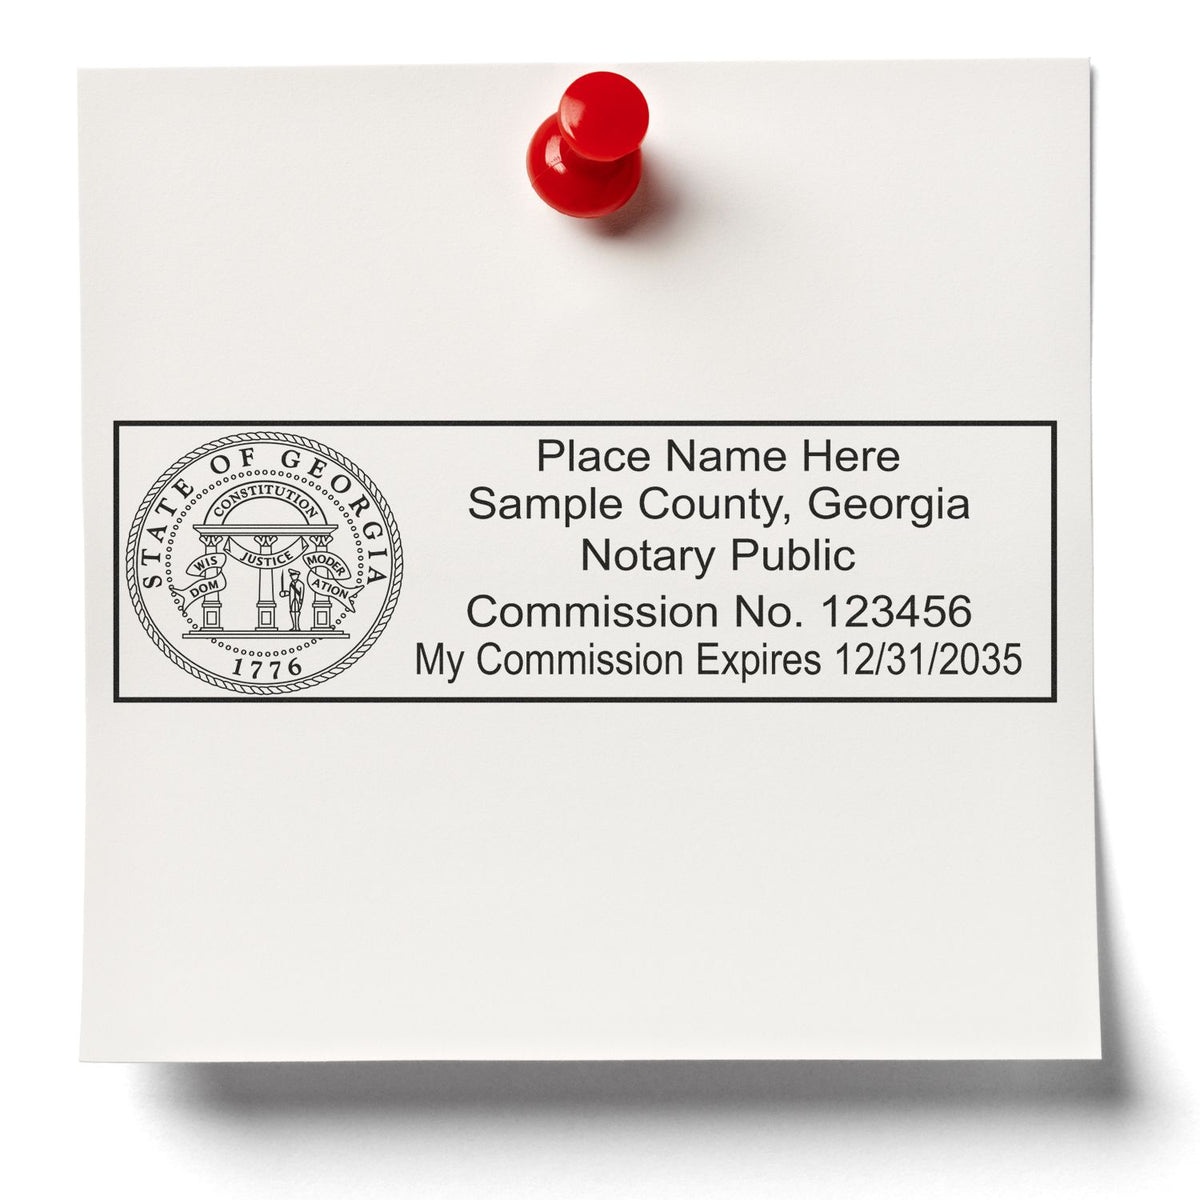 A photograph of the Wooden Handle Georgia Rectangular Notary Public Stamp stamp impression reveals a vivid, professional image of the on paper.